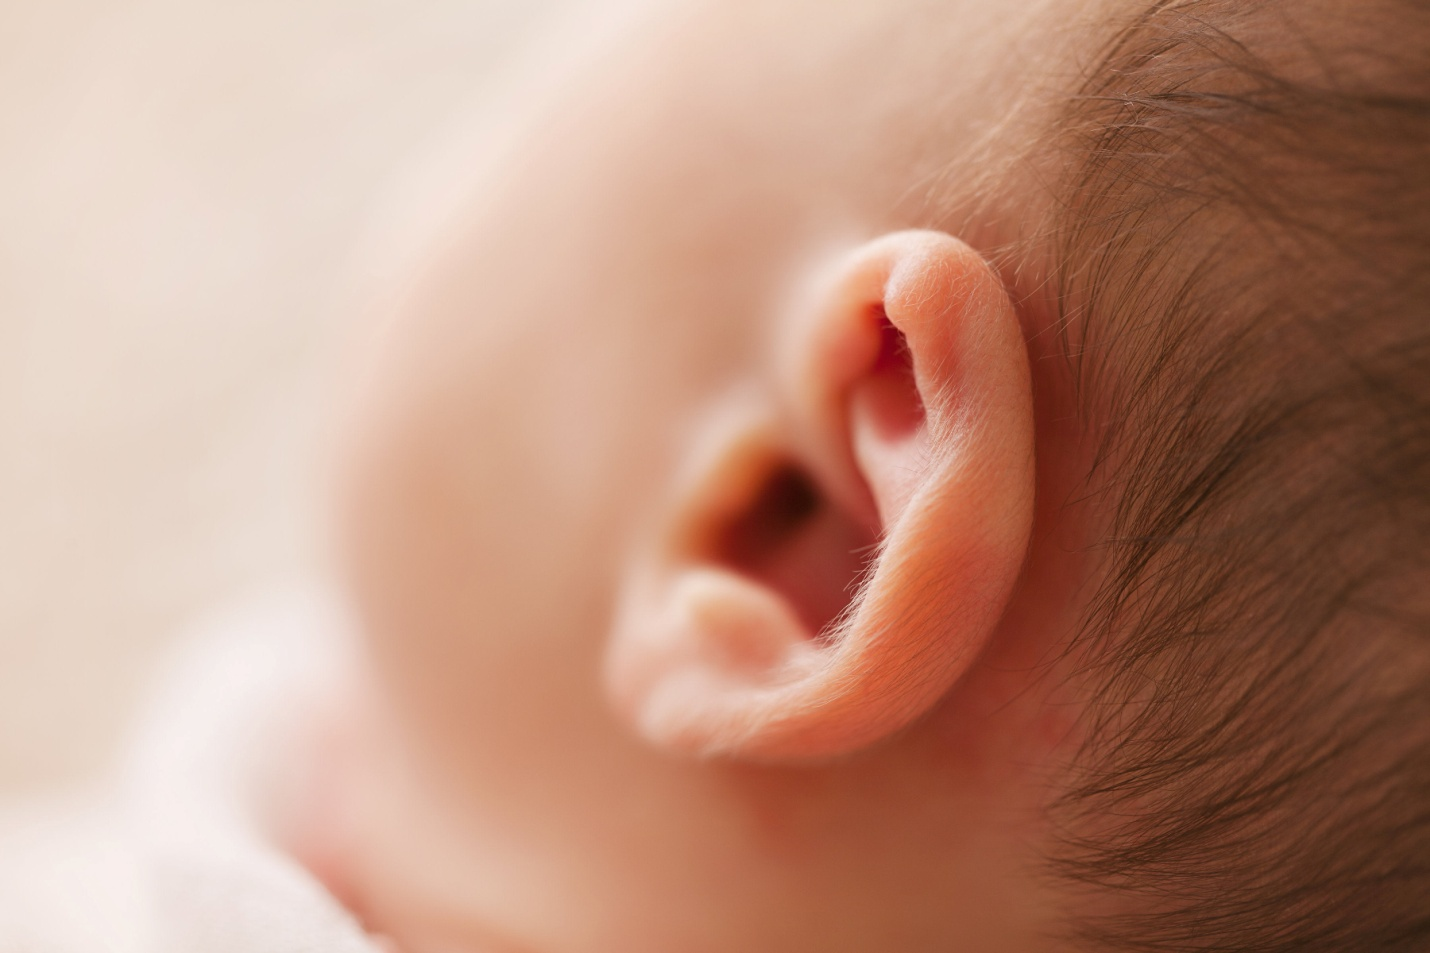 A close-up shot of a baby's ear